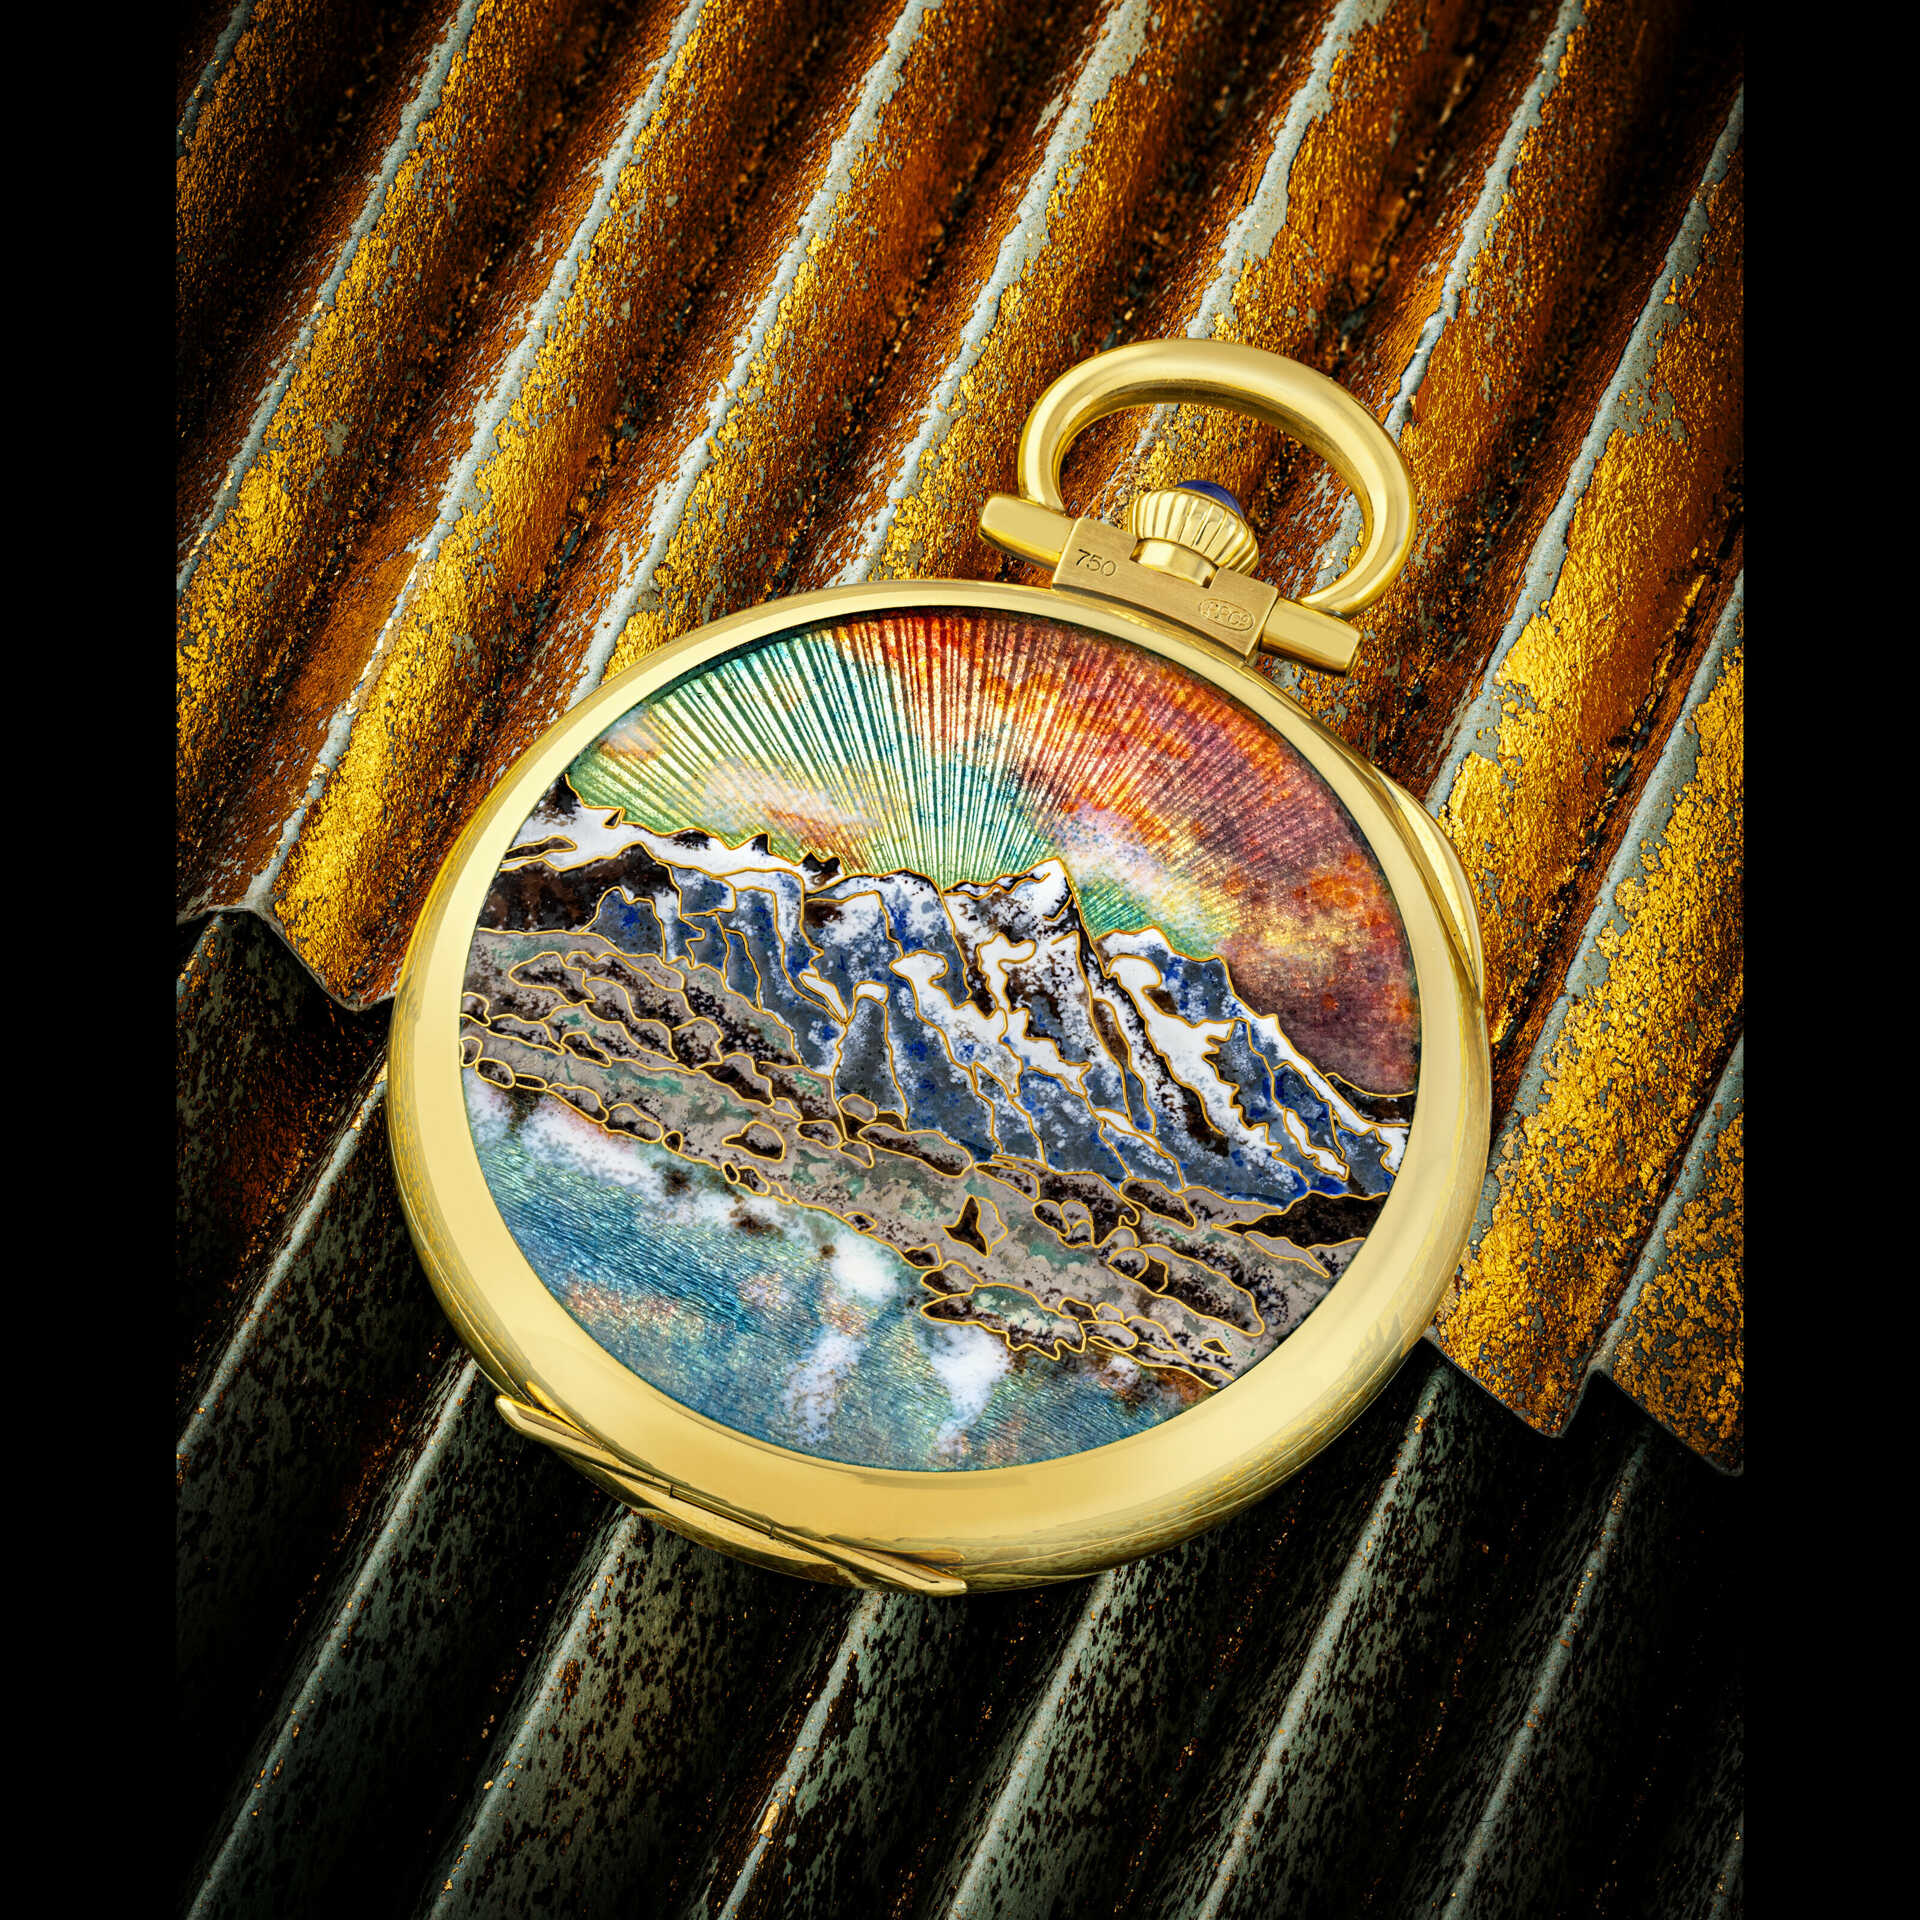 PATEK PHILIPPE. A ONE-OF-A-KIND AND EXCEPTIONAL 18K GOLD AND SAPPHIRE-SET POCKET WATCH WITH CLOISONN&#201; ENAMEL DEPICTING PANORAMA OF MONT BLANC FROM LAC BLANC, ENAMEL DIAL WITH BREGUET NUMERALS AND MATCHING 18K GOLD, MARBLE AND SAPPHIRE-SET POCKET WATC